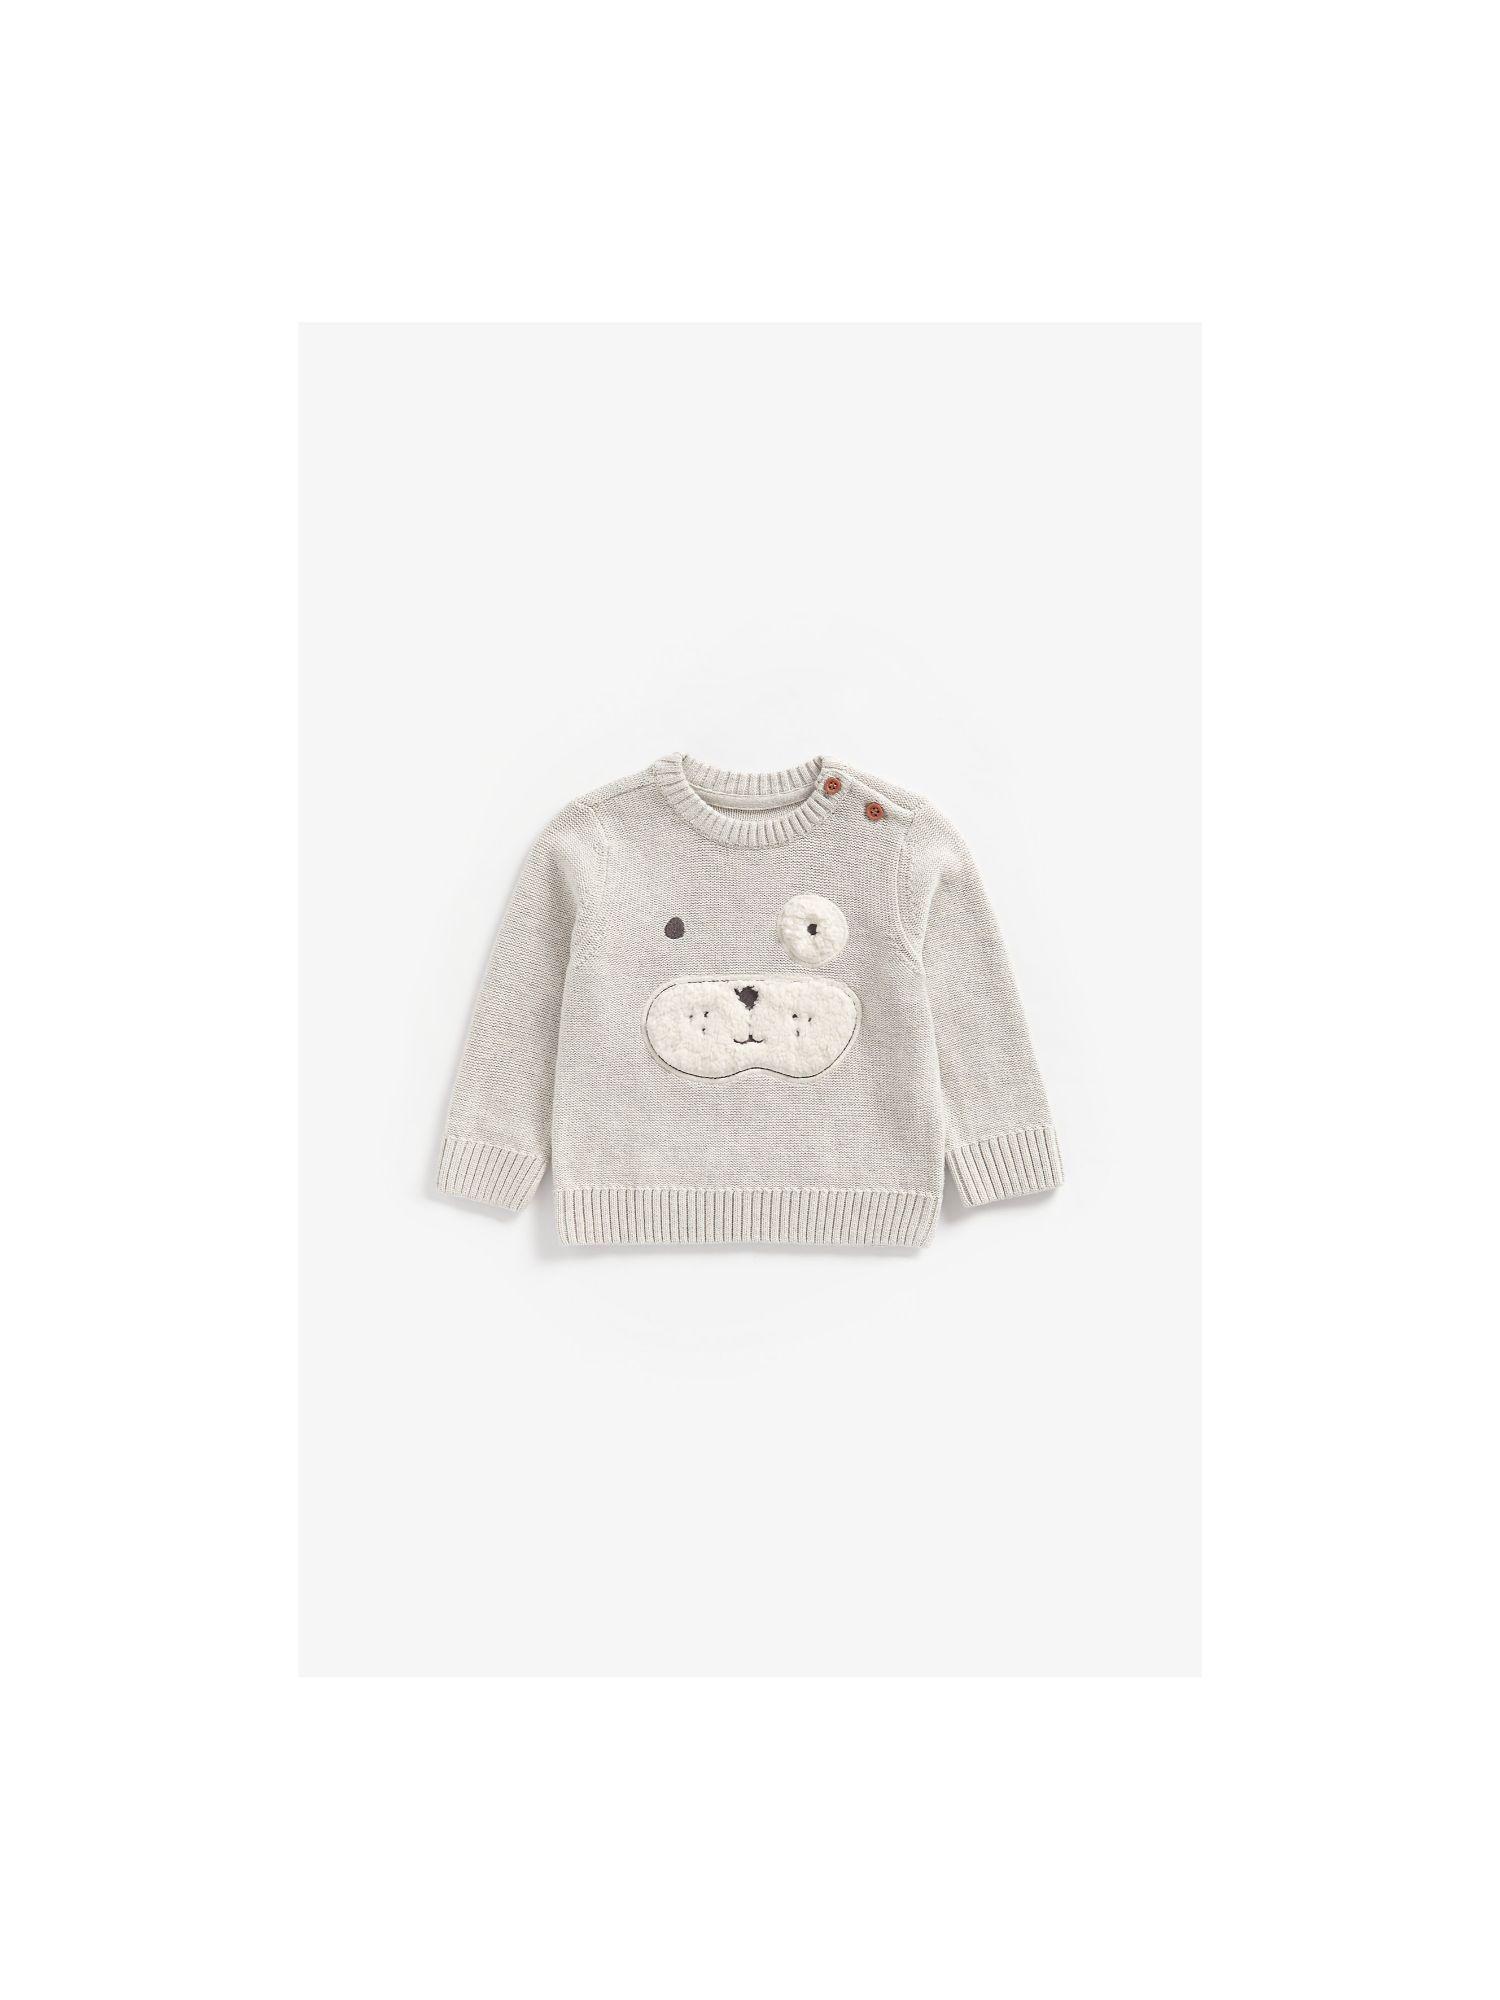 mother care mb hsh dog novelty knit sweater